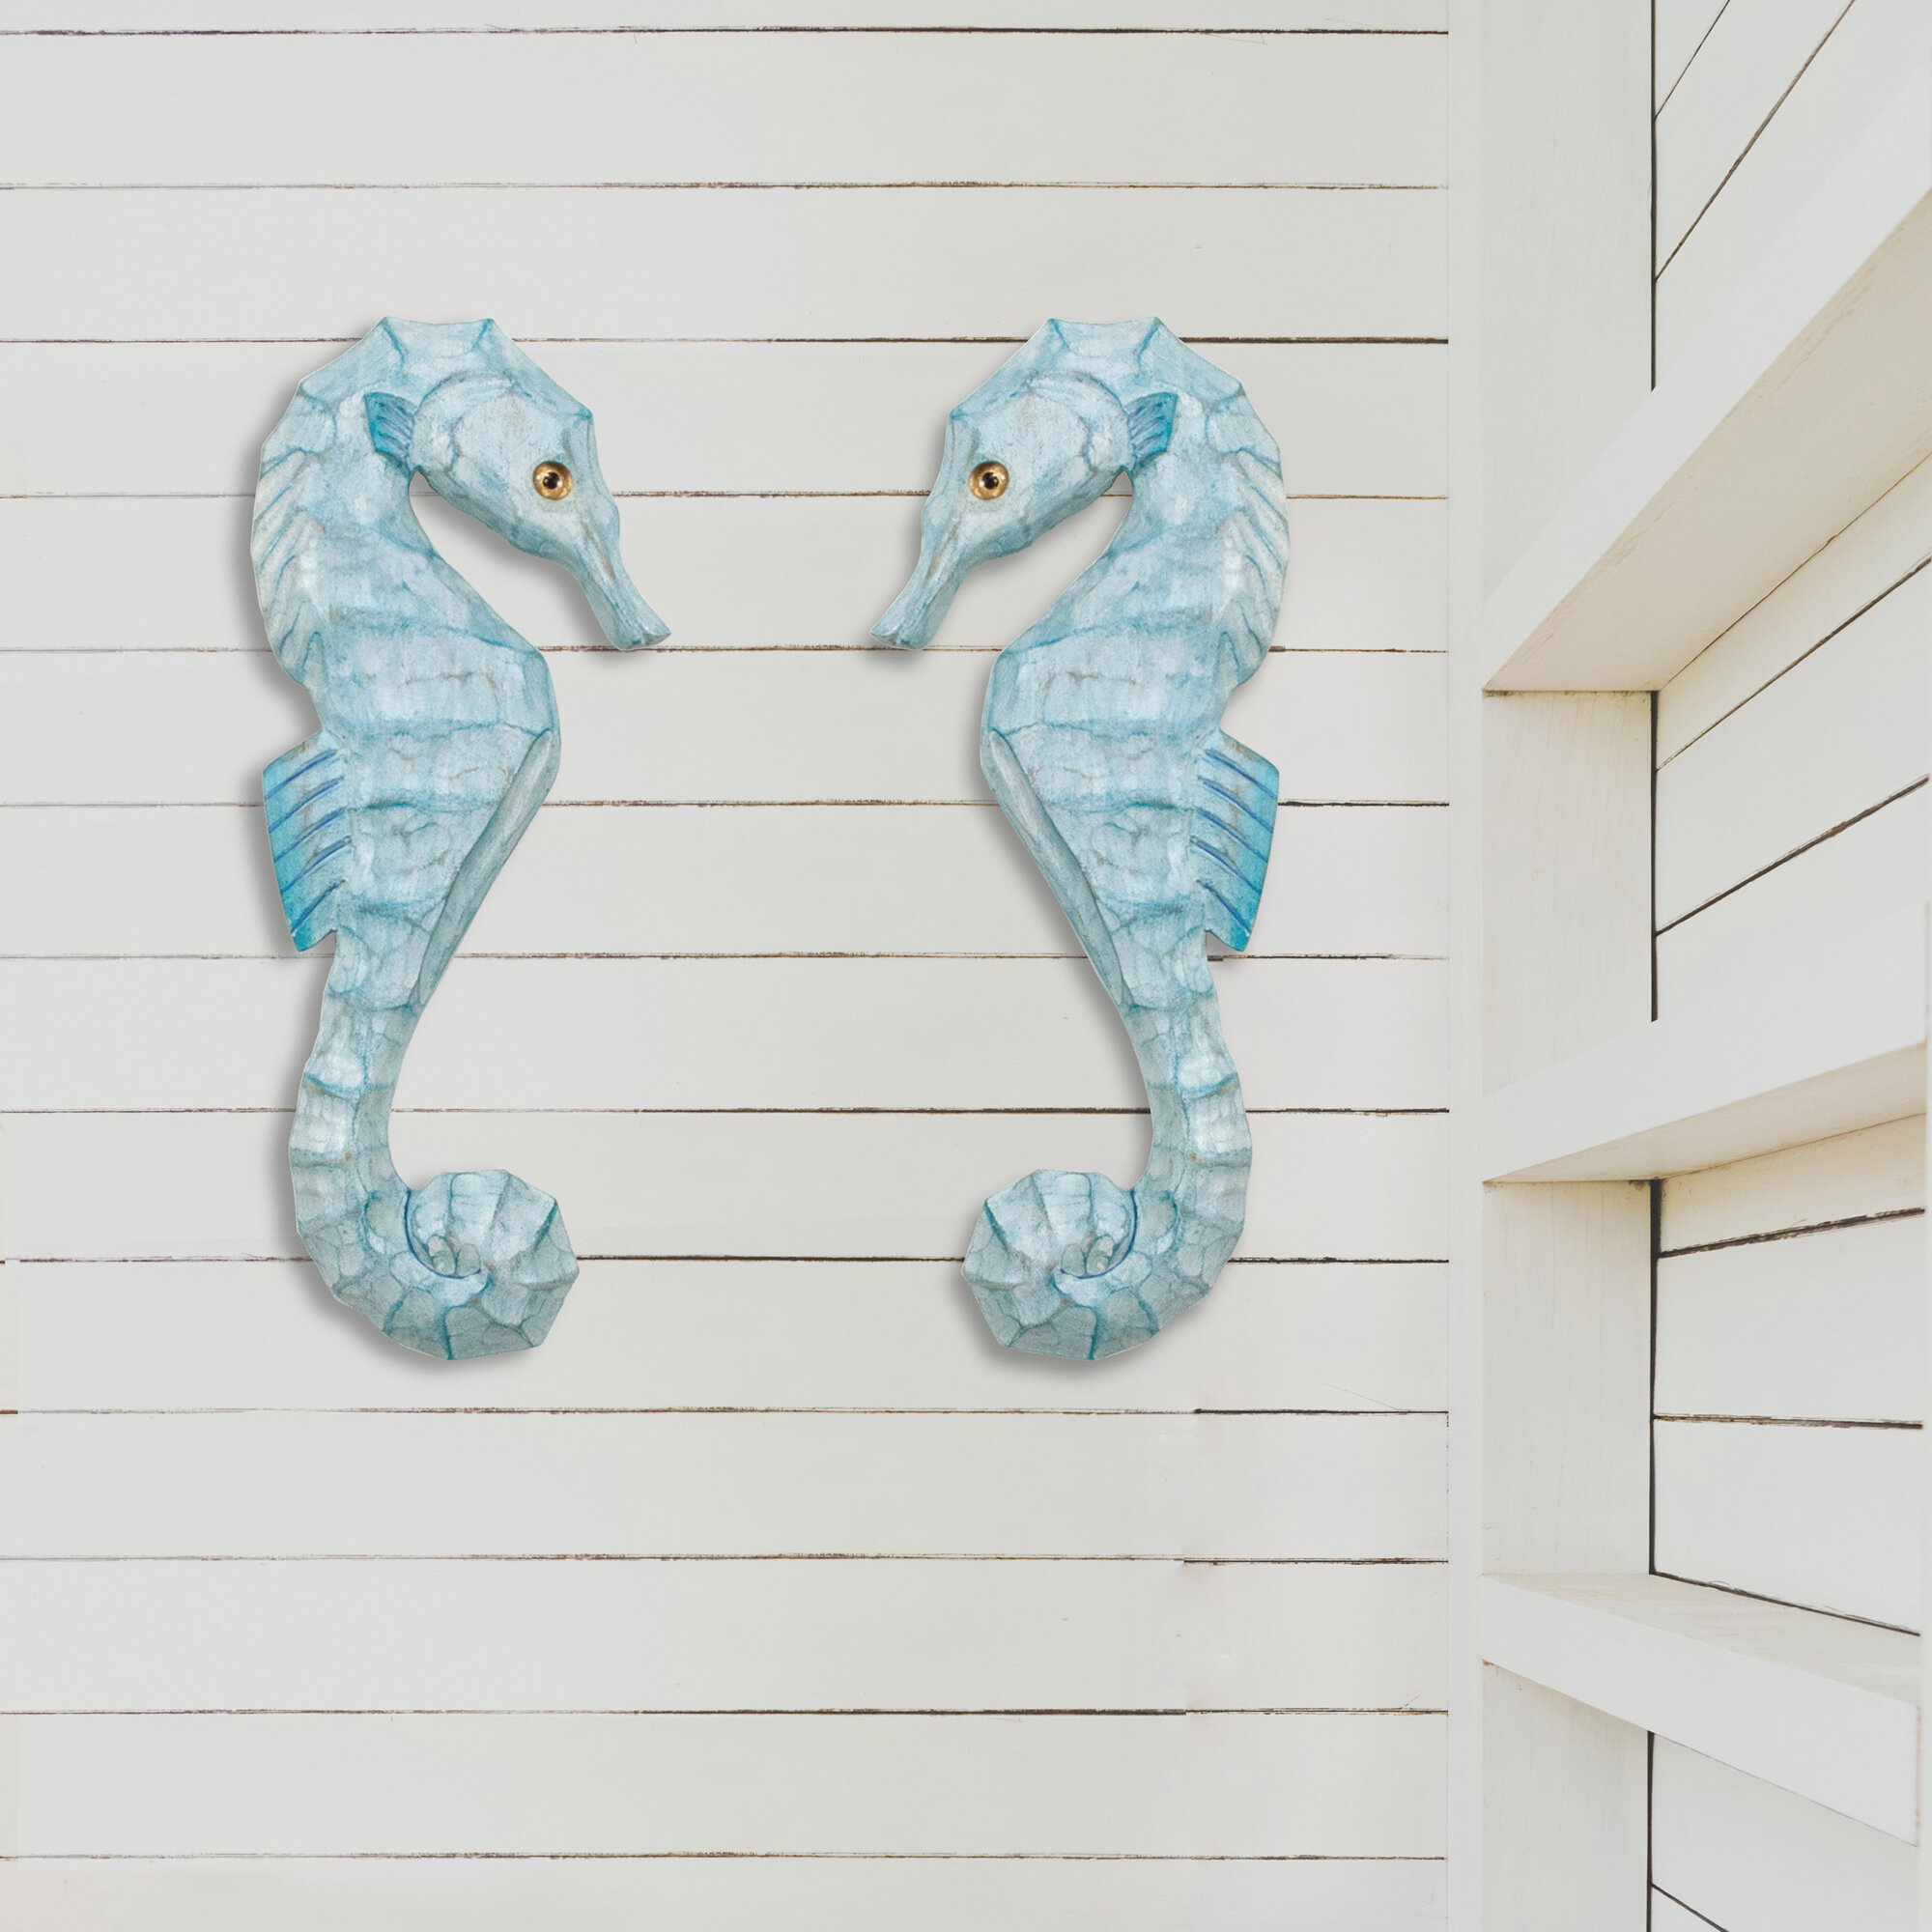 Set of 2 Wall Art Details about   Seahorse Wall Decor 